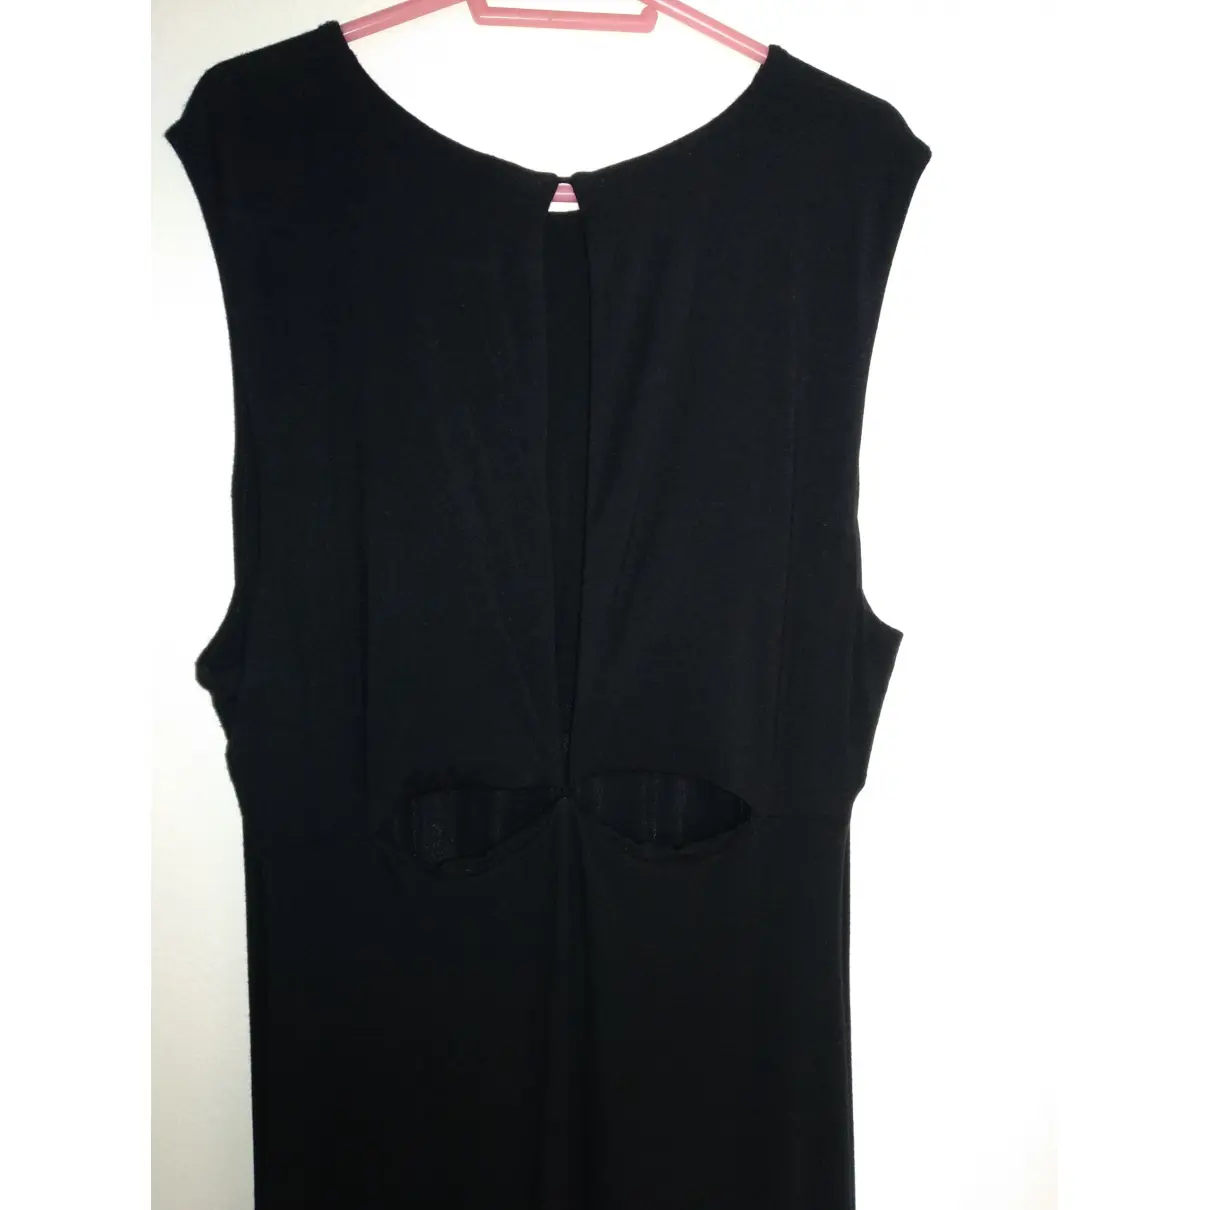 Buy T by Alexander Wang Mid-length dress online